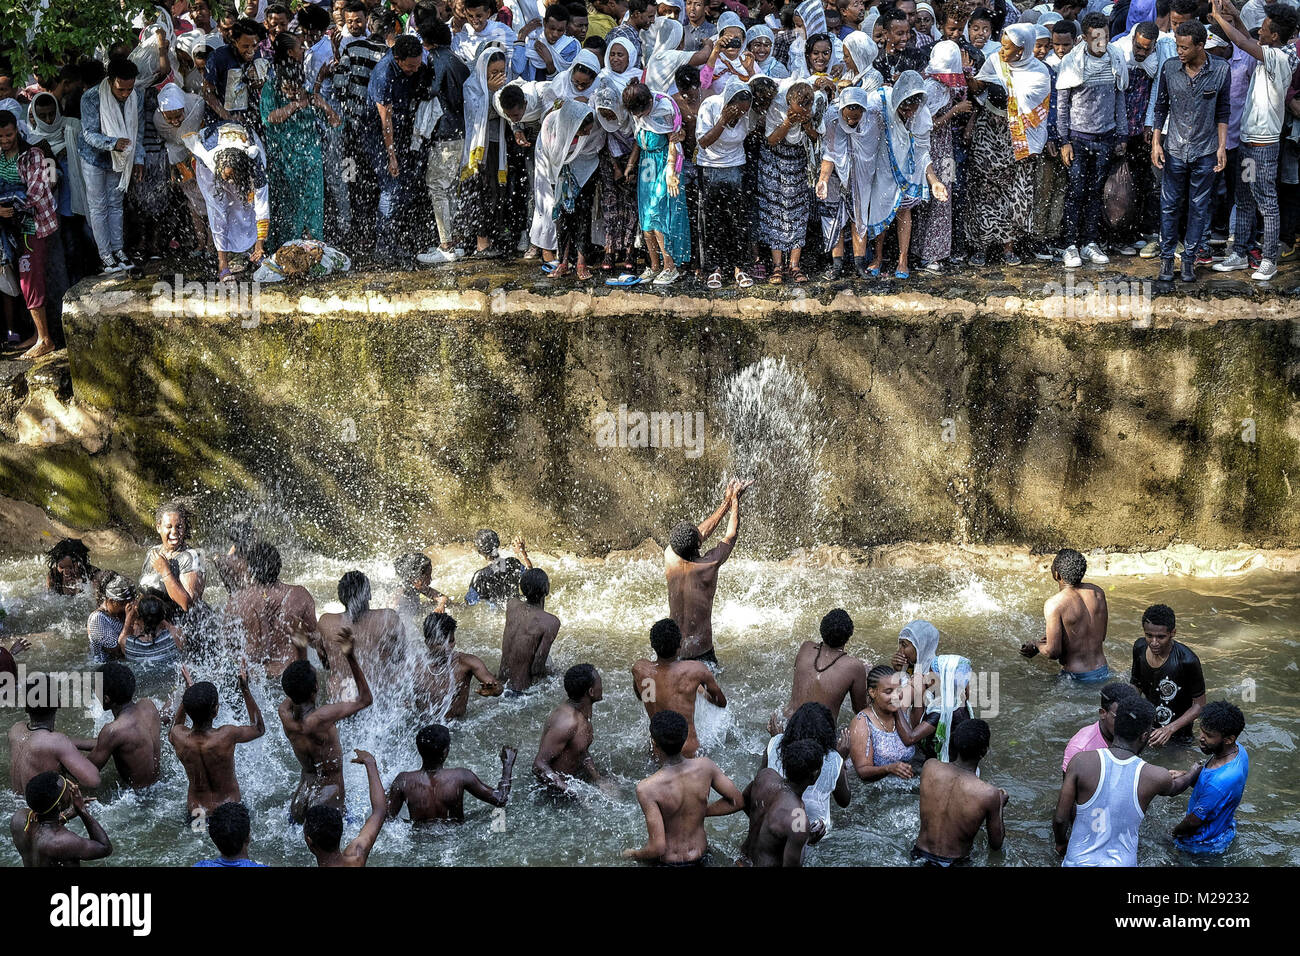 January 19, 2018 - Gondar, Amhara Region, Ethiopia - Pilgrims bathing in the waters of the Fasilides Baths..The annual Timkat festival, an Orthodox Christian celebration of Epiphany, remembers the baptism of Jesus in the Jordan river. During the festival, tabots, models of the Ark of the Covenant, are taken from churches around the city of Gondar and paraded through the streets to Fasilides Bath. Where finally the pilgrims end up bathing in the water blessed by the priests. (Credit Image: © Oscar Espinosa/SOPA via ZUMA Wire) Stock Photo